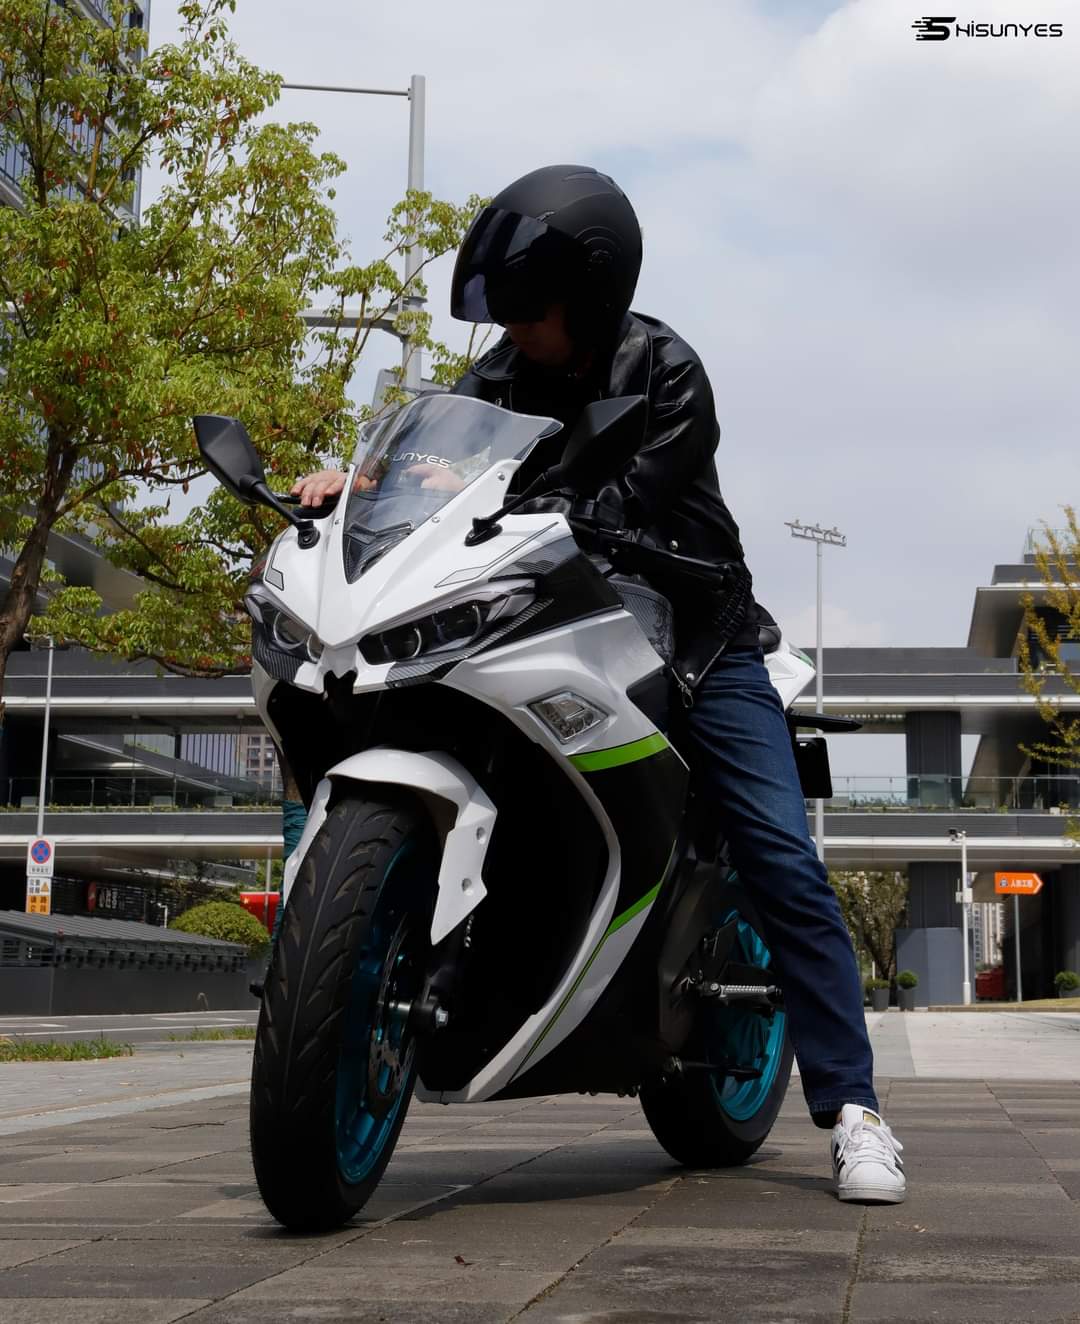 The electric motorcycle Hisunyes V3